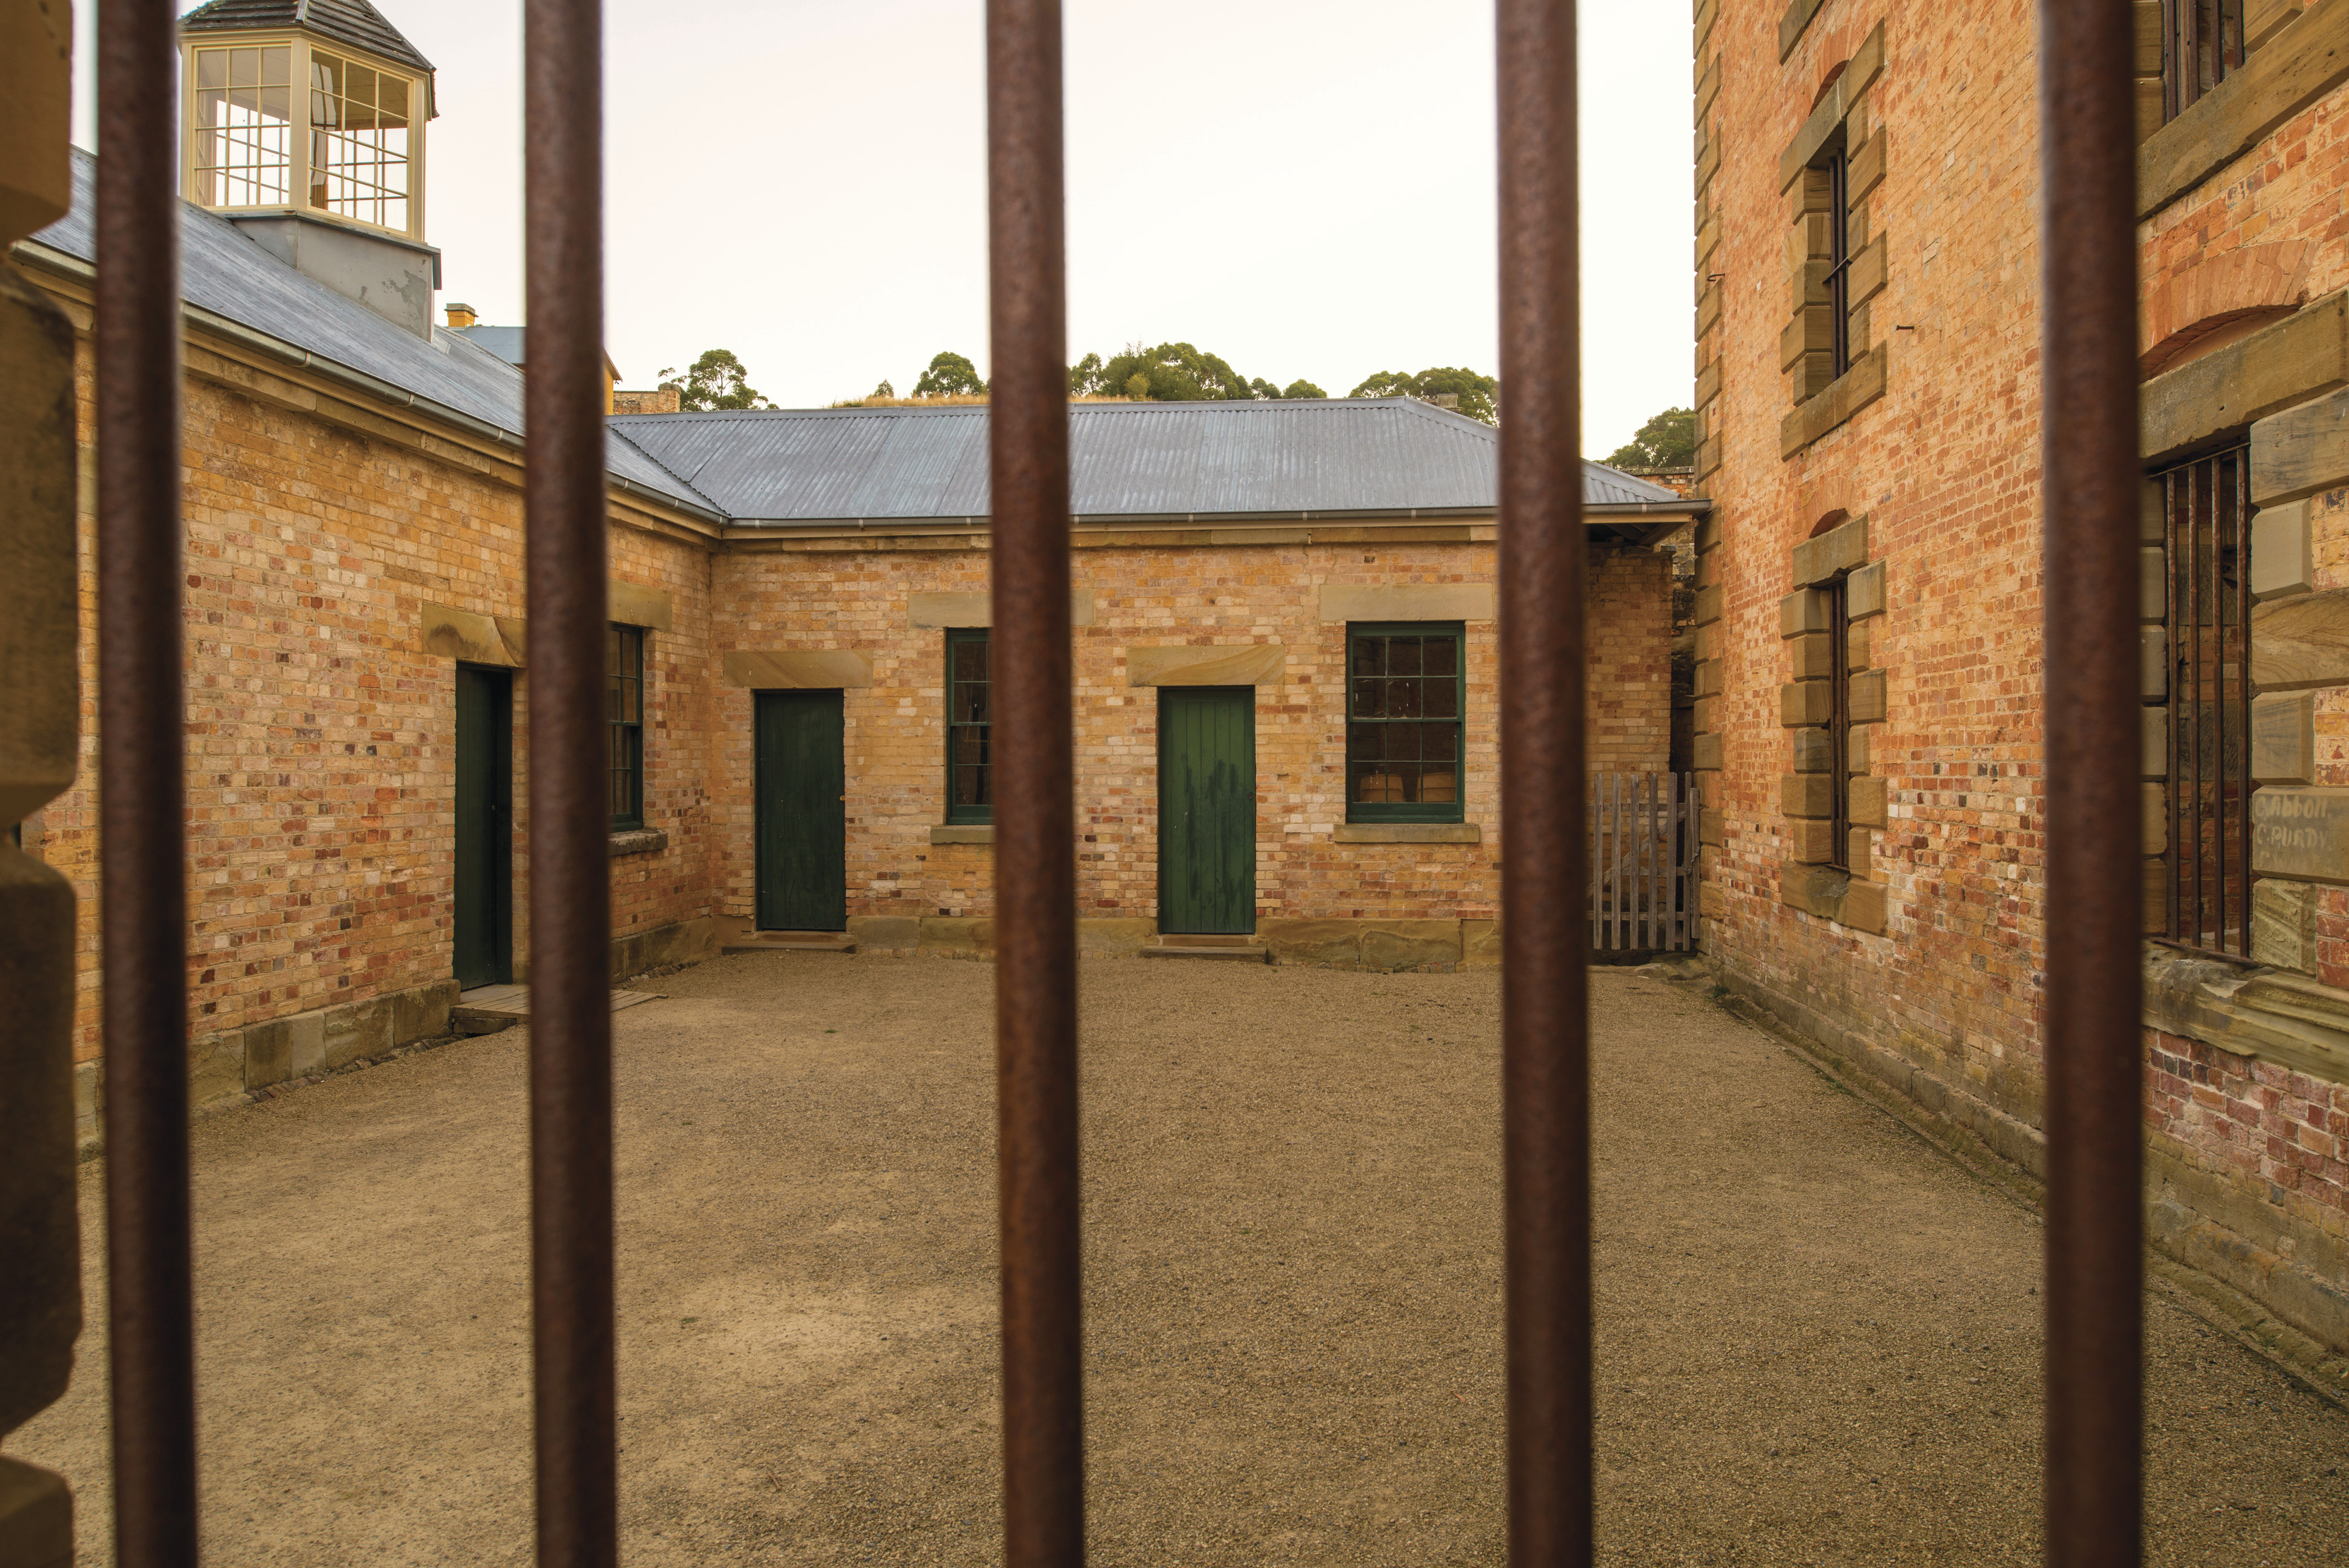 The penitentiary at Port Arthur Historic Site, taken from the point of view of behind the railings.